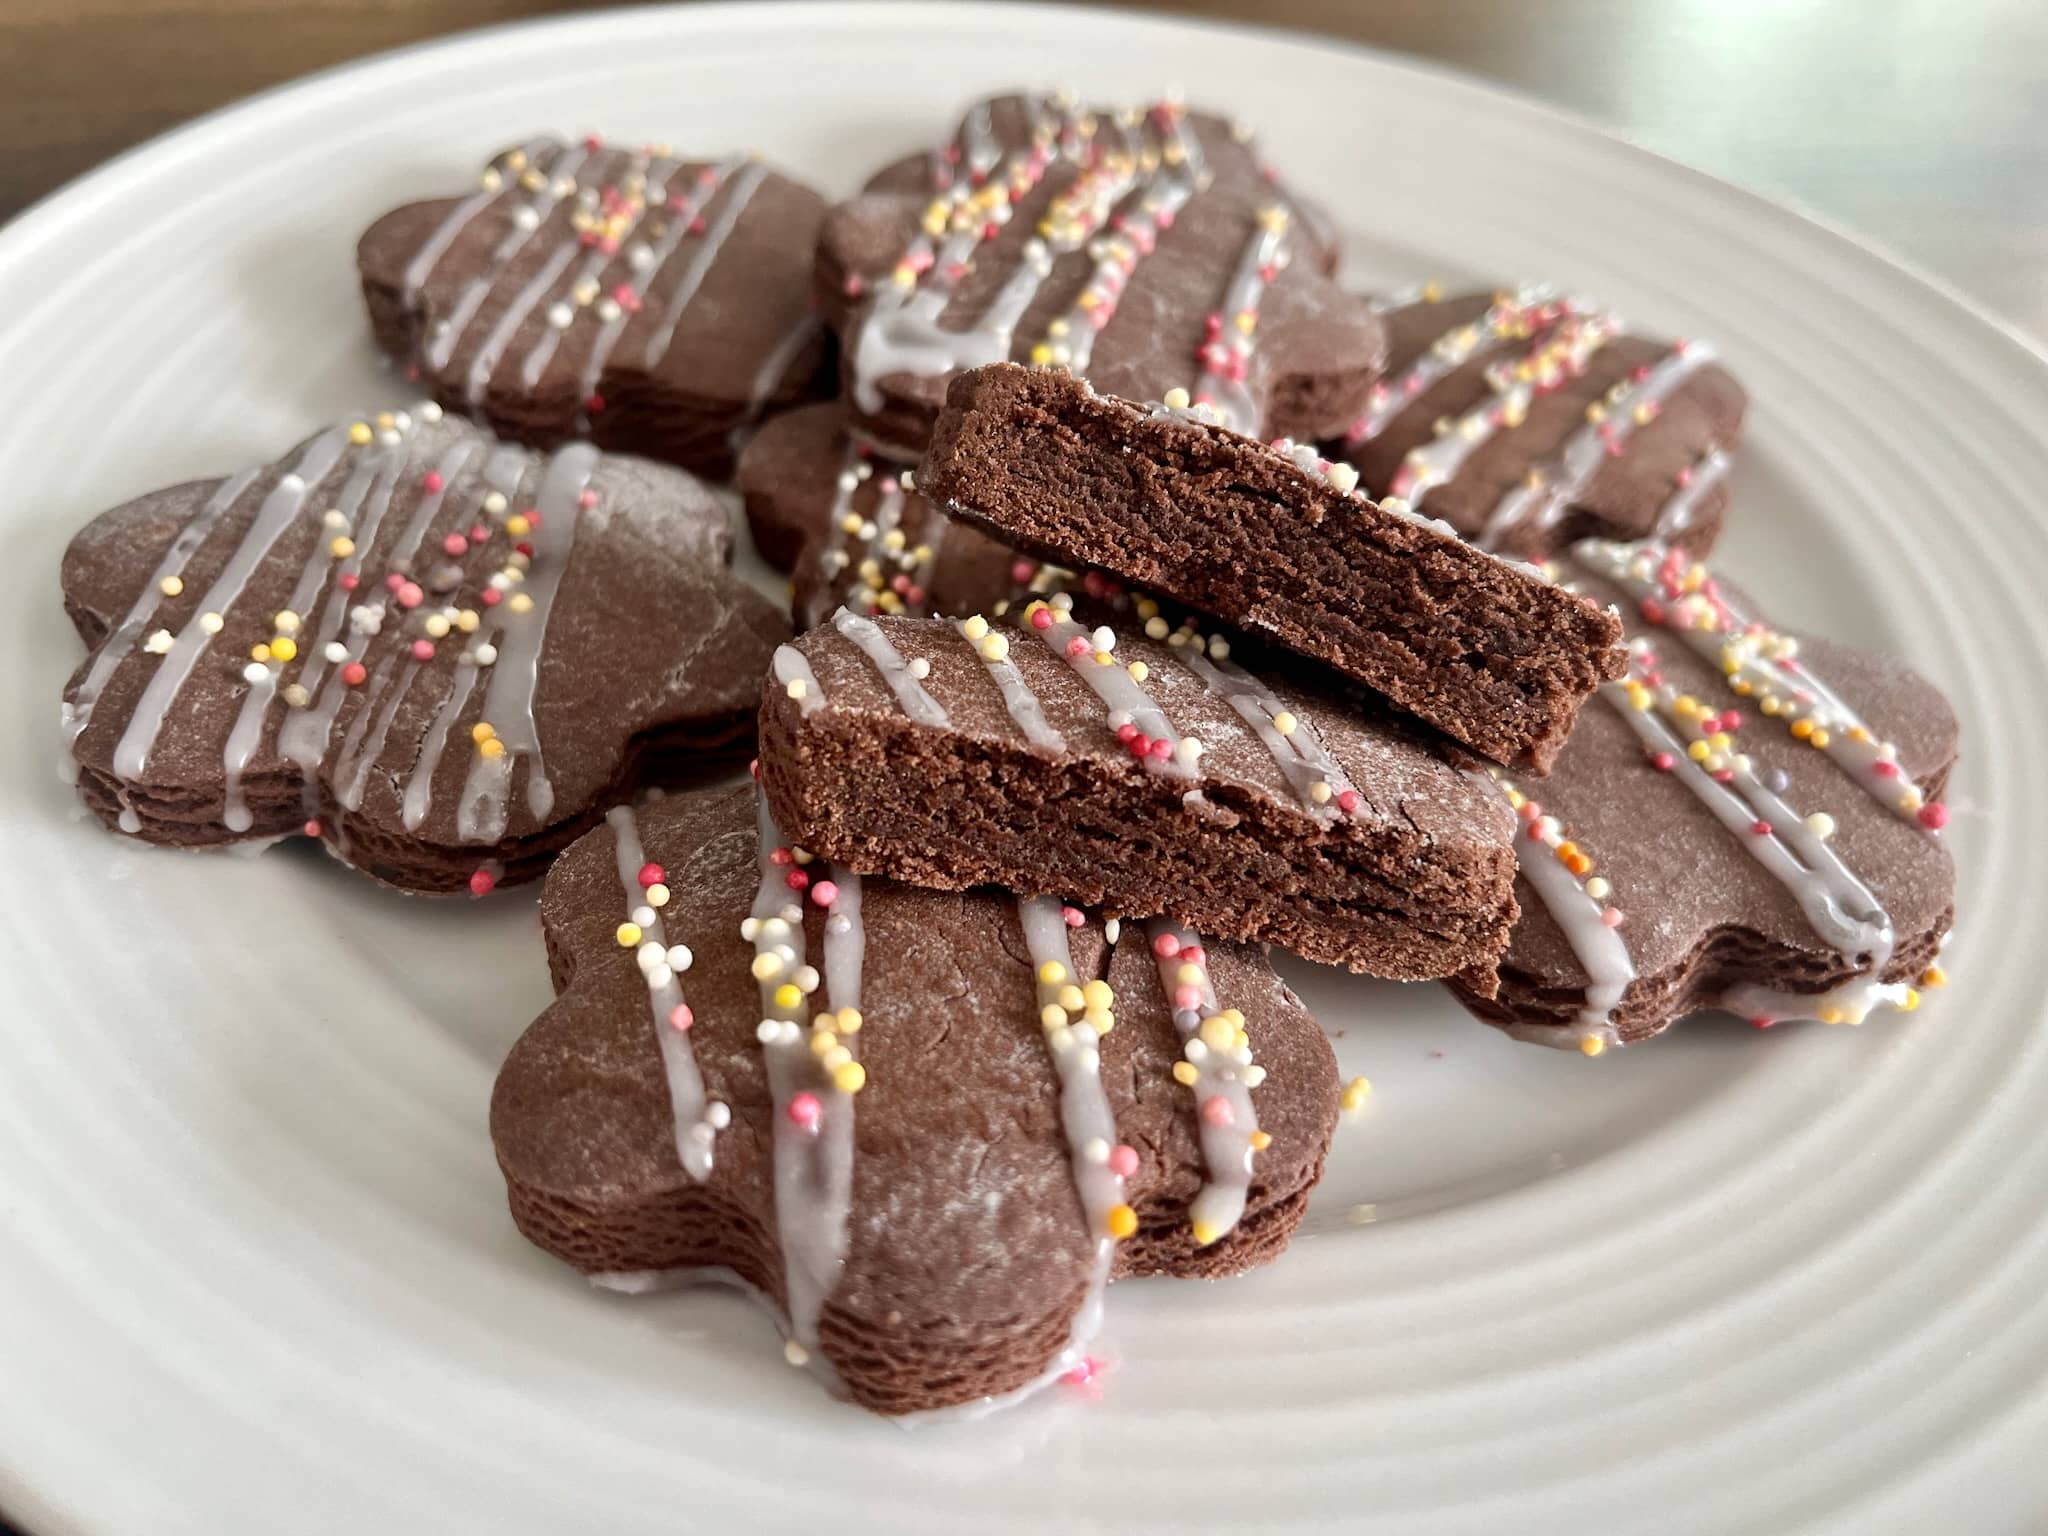 Chocolate cookies decorated with icing sugar and sprinkles showing inside